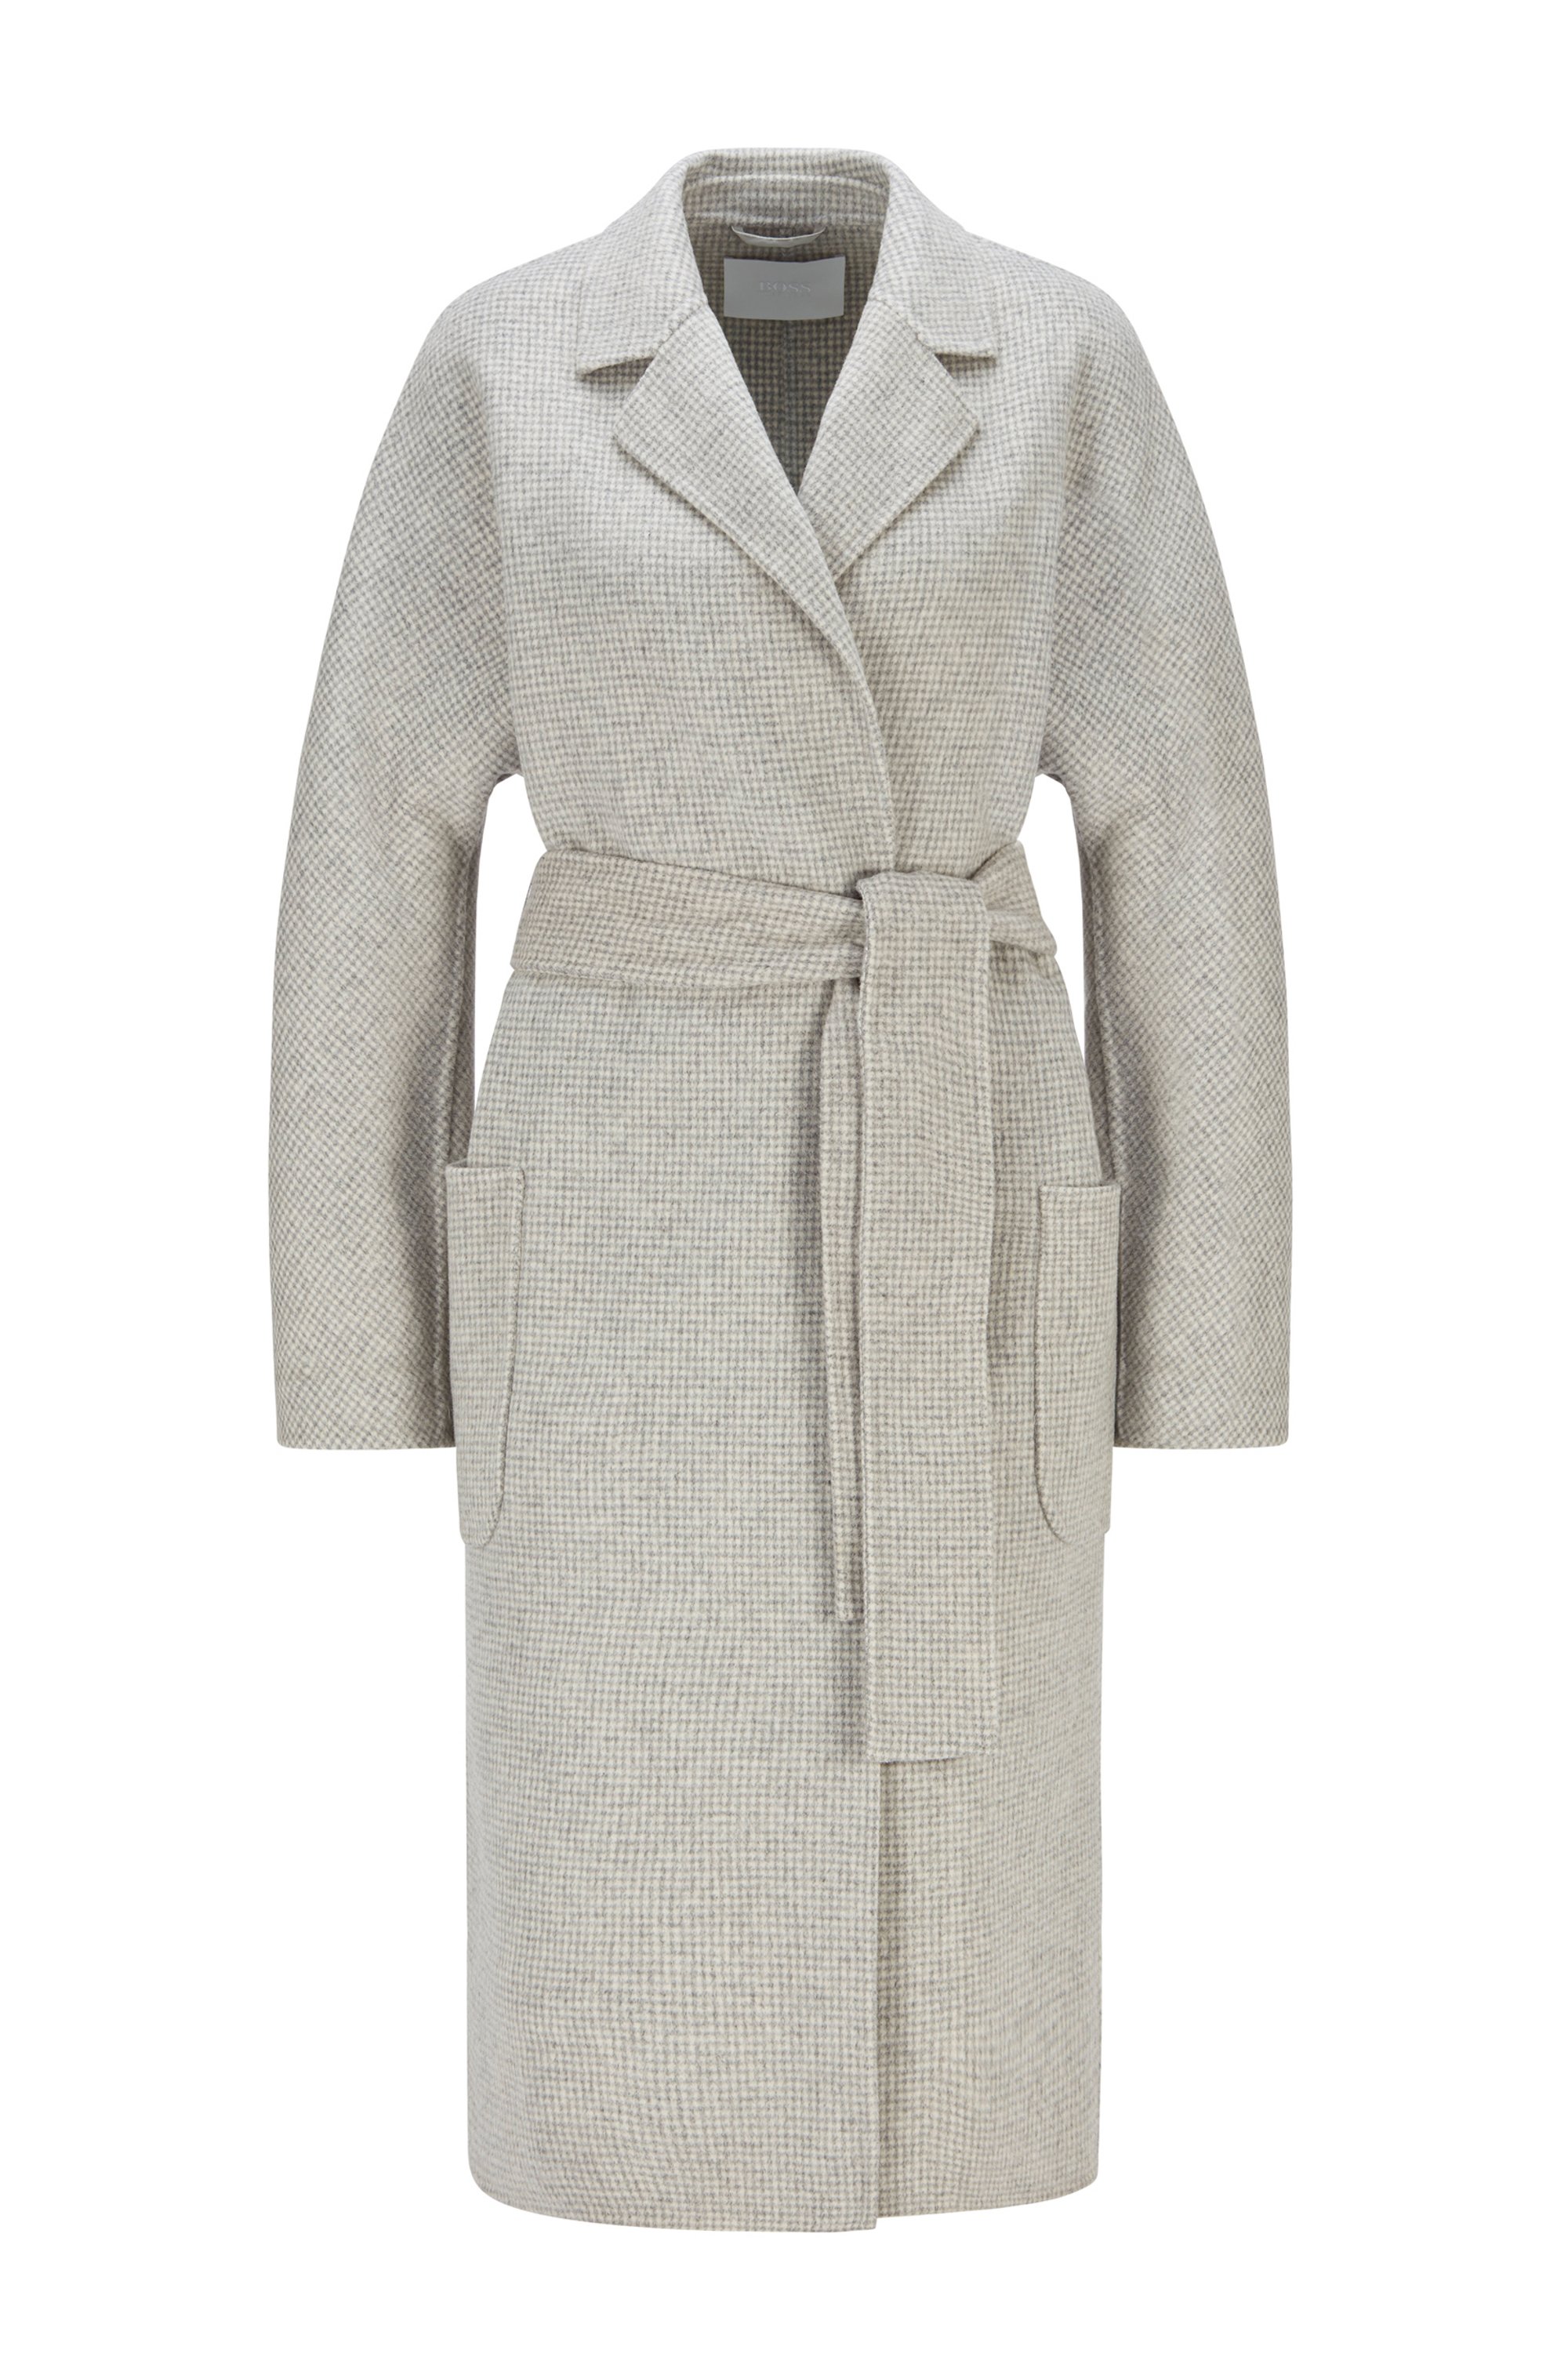 Belted coat in a patterned wool blend, Patterned